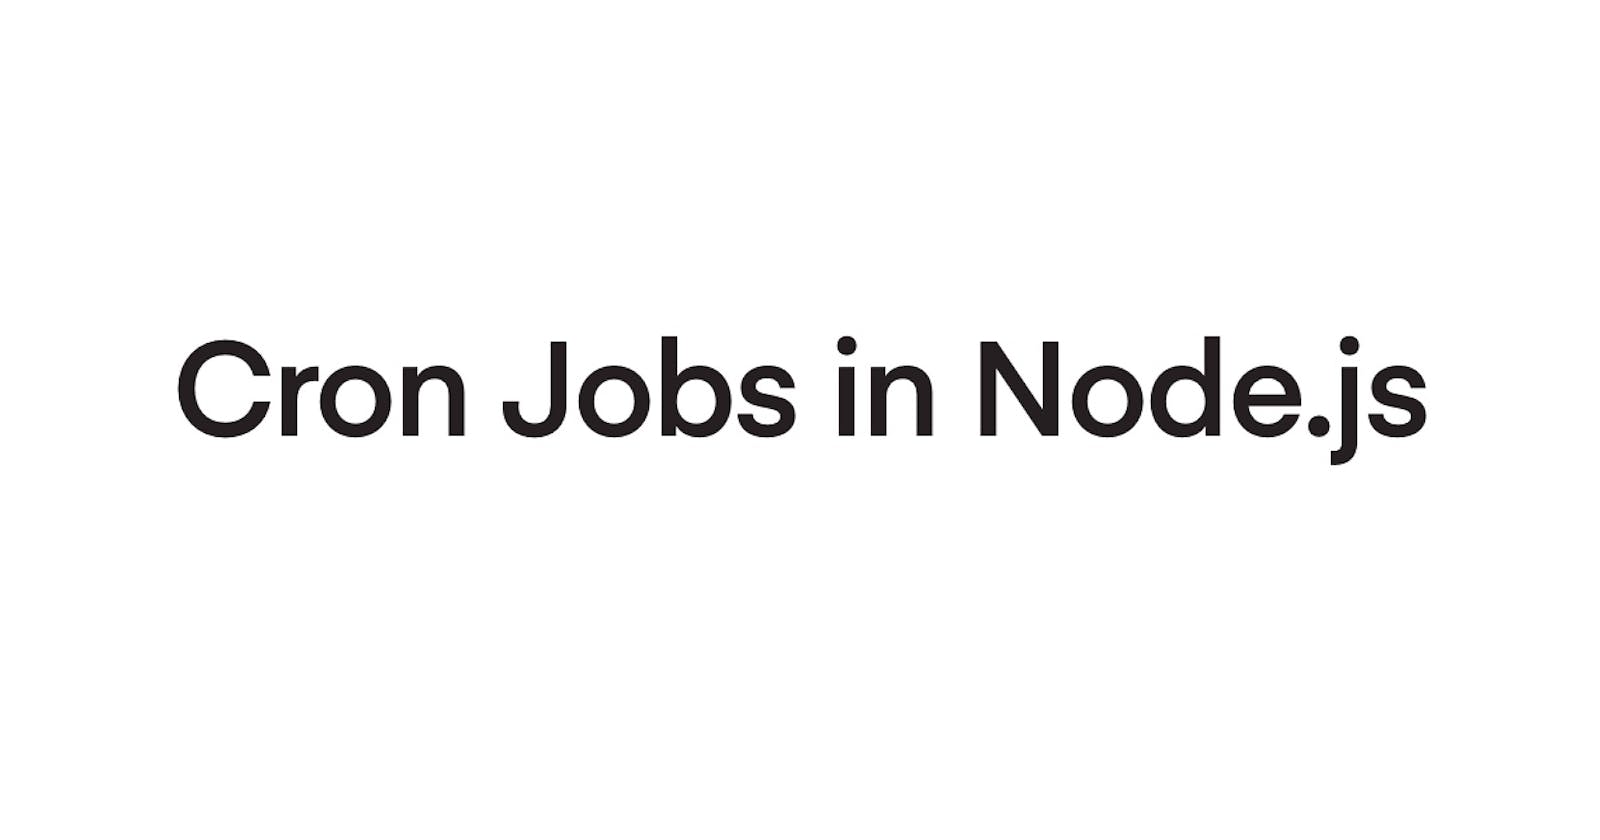 The Ultimate Guide to Cron Jobs in Node.js